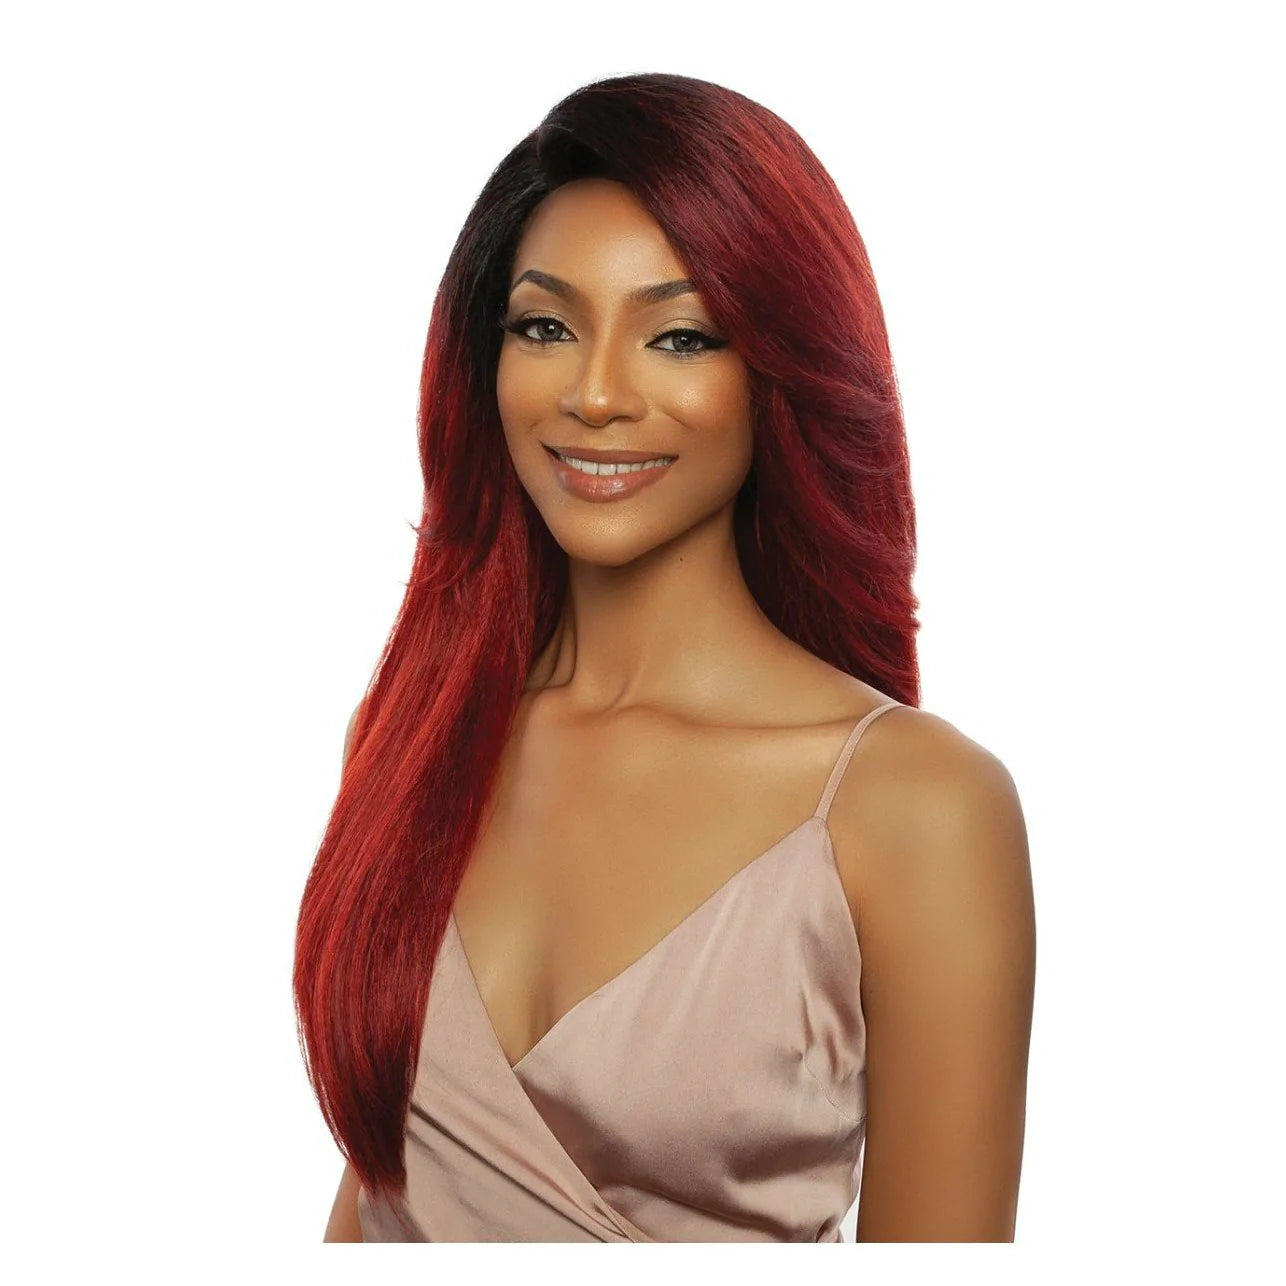 Mane Concept Brown Sugar Synthetic HD Silk Press Lace Front Wig - BSHS201 Chiffon